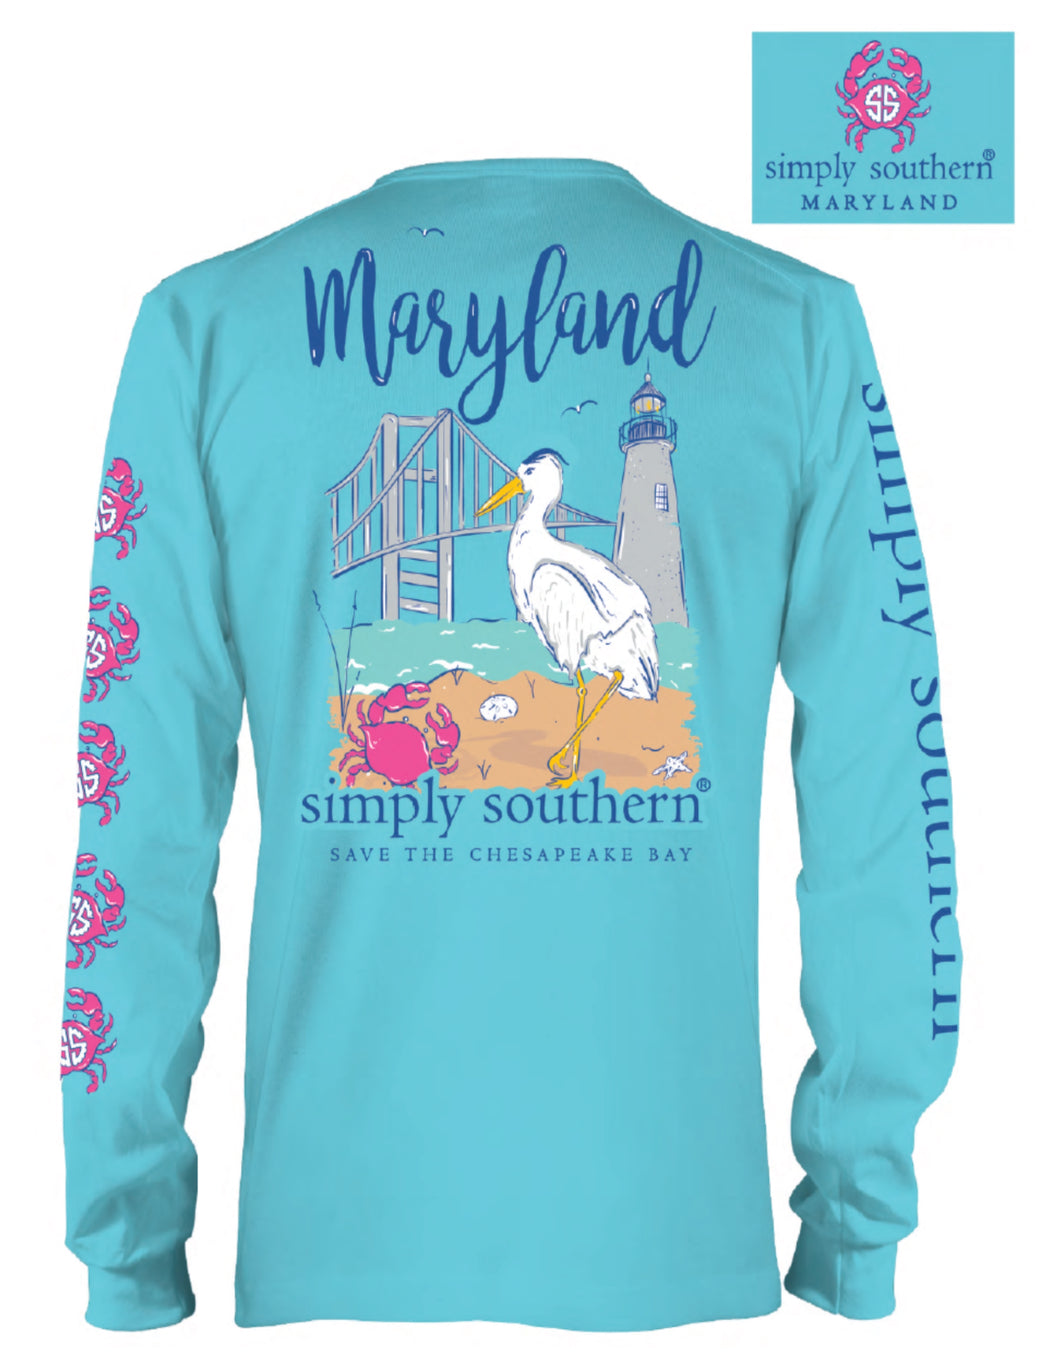 Maryland Simply Southern Long Sleeve T-Shirt PAM’S EXCLUSIVE!